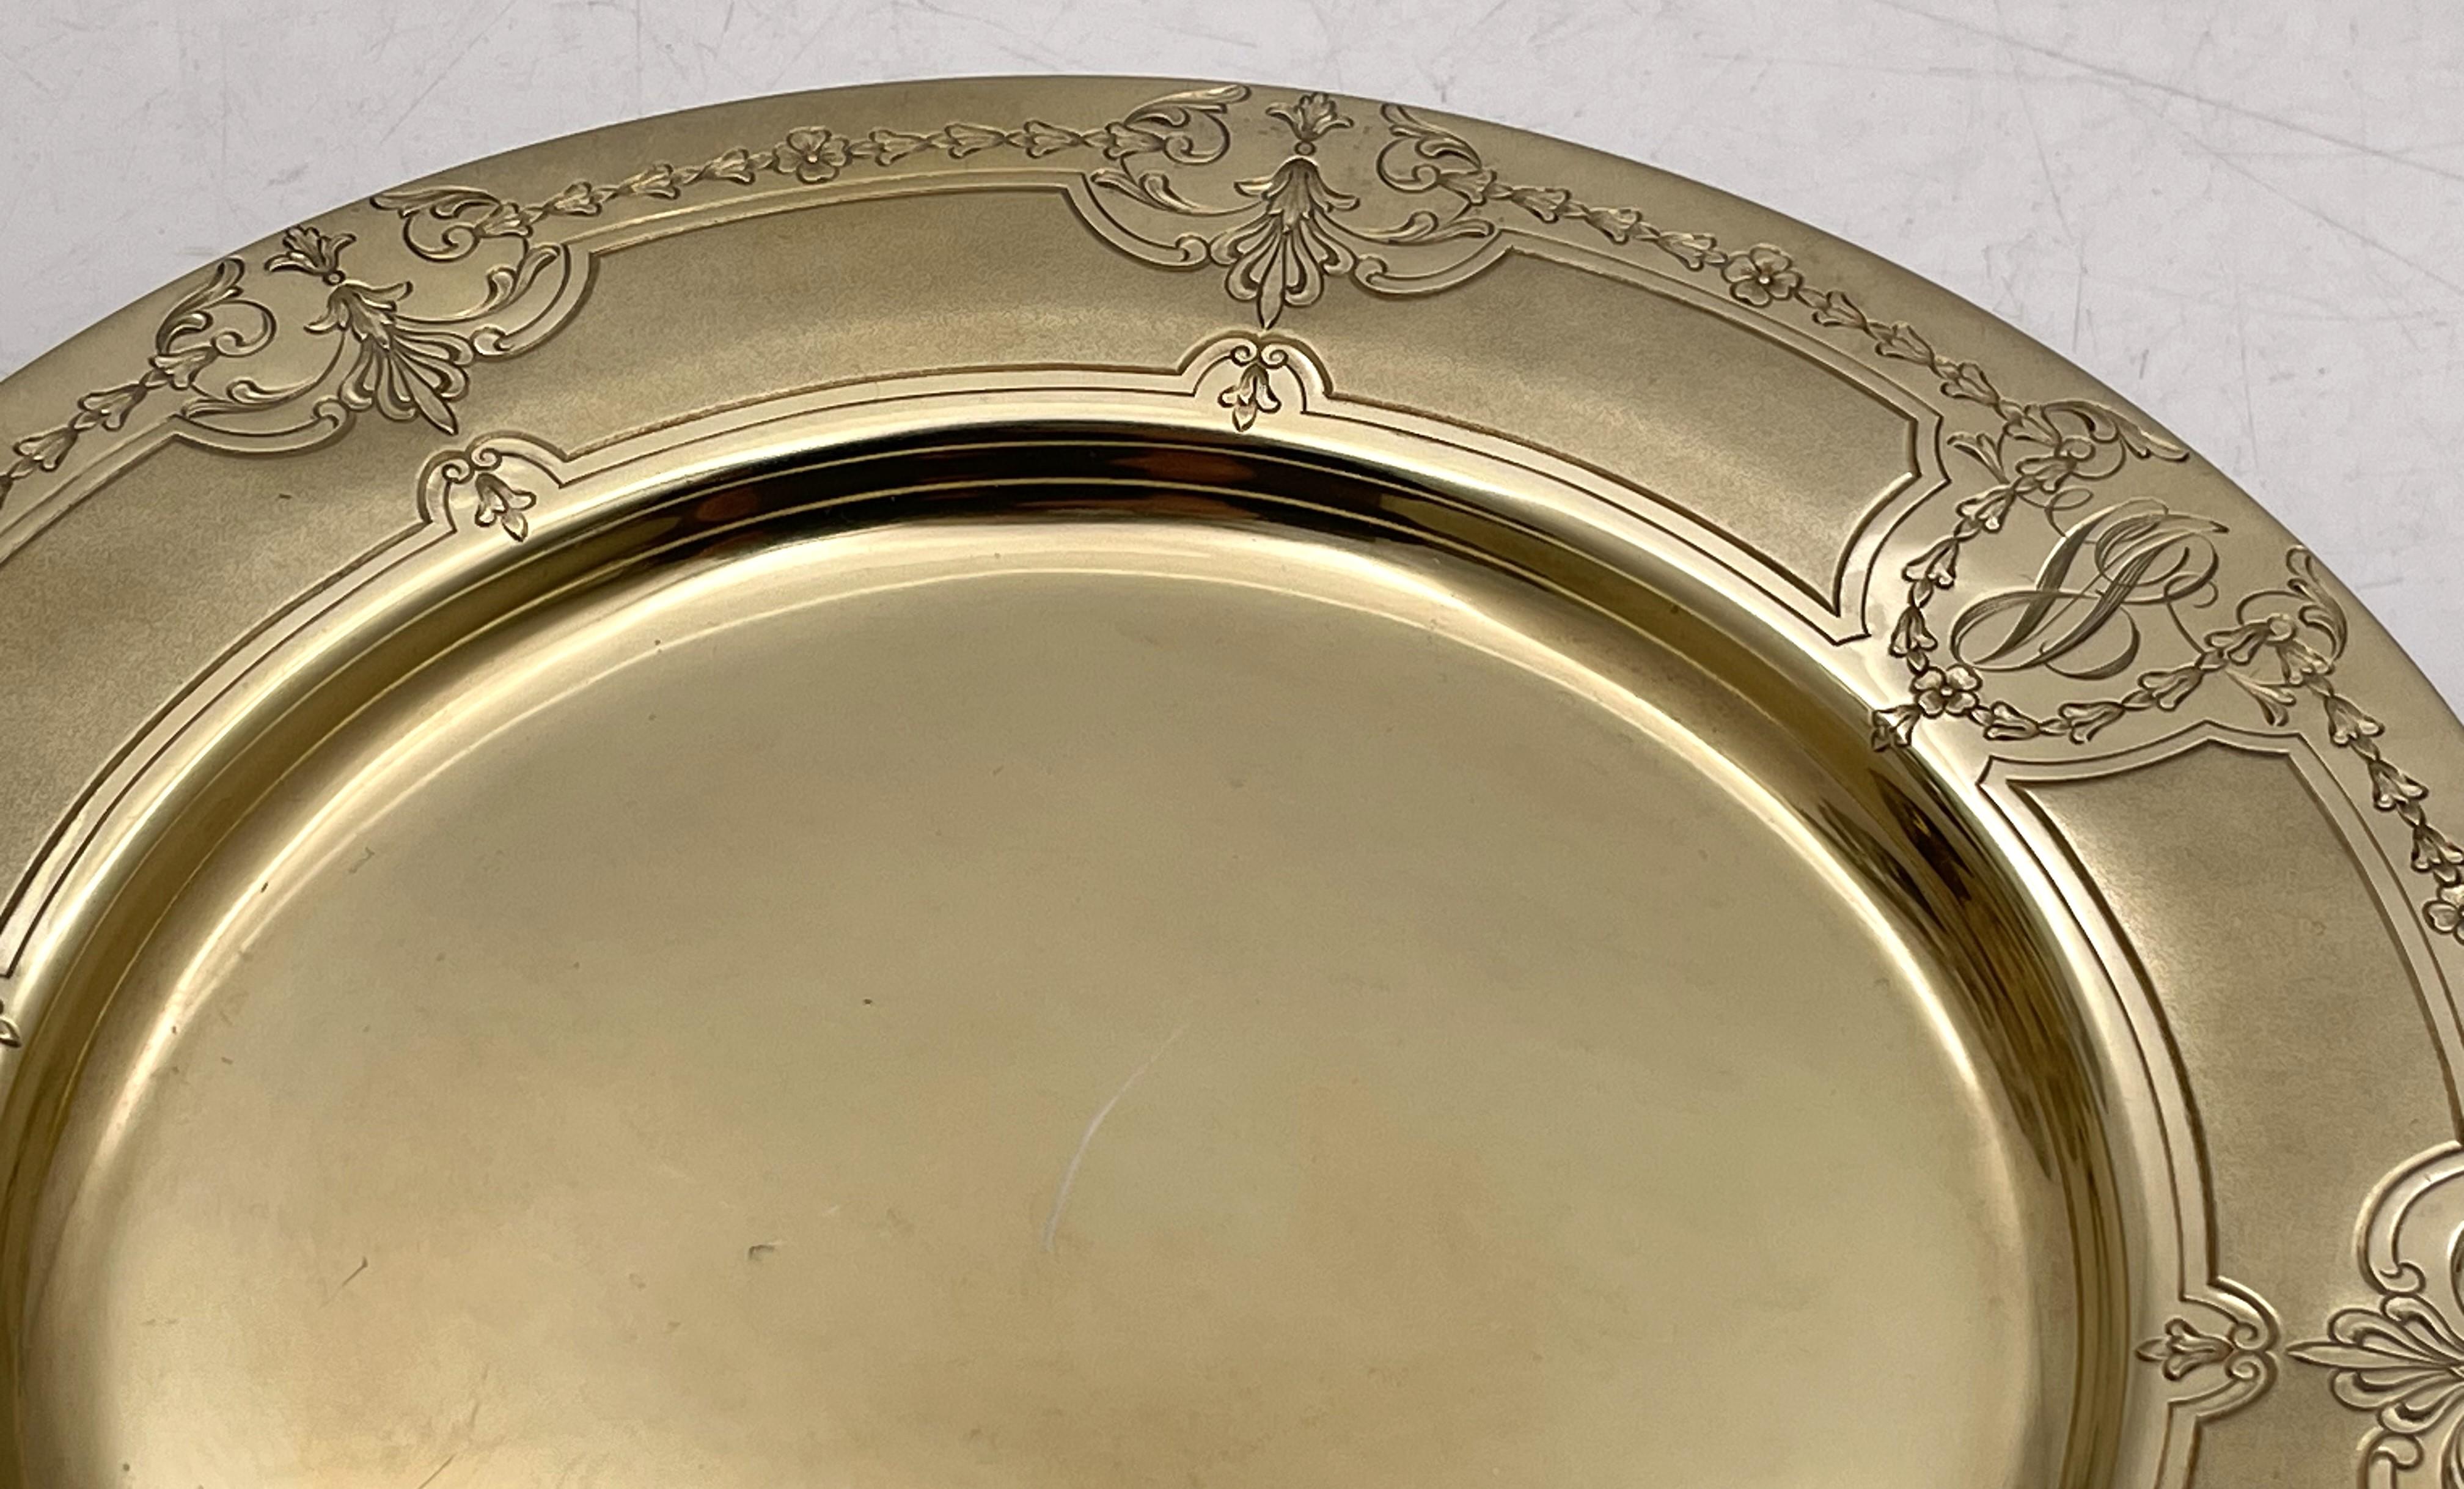 American Towle Set of 15 Gilt Sterling Silver Dessert / Bread Plates Early 20th Century For Sale